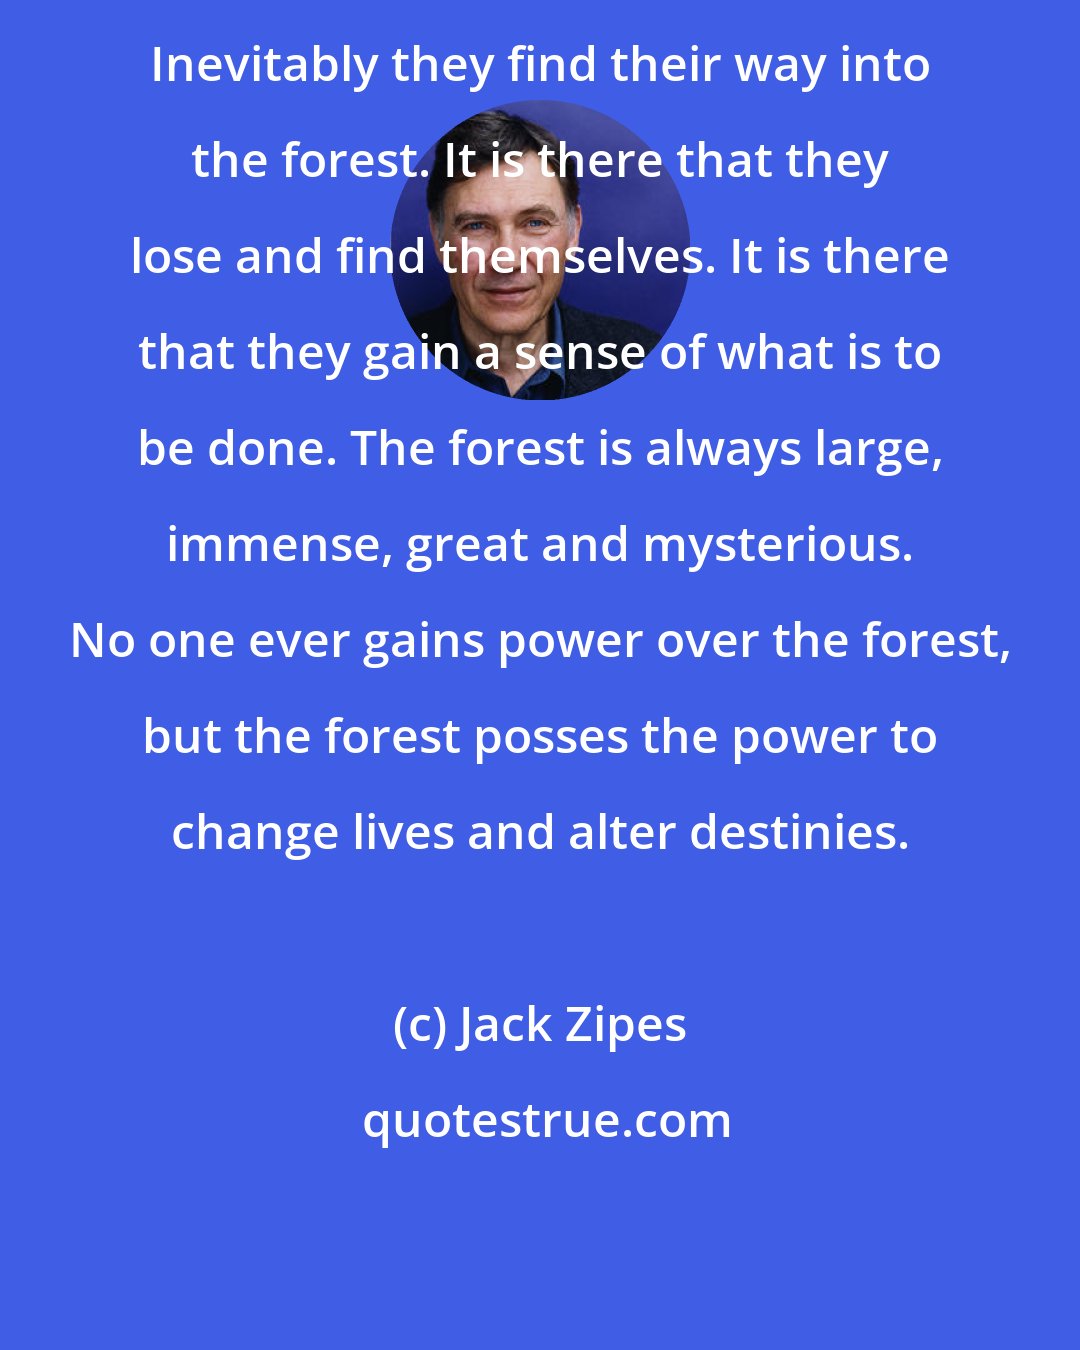 Jack Zipes: Inevitably they find their way into the forest. It is there that they lose and find themselves. It is there that they gain a sense of what is to be done. The forest is always large, immense, great and mysterious. No one ever gains power over the forest, but the forest posses the power to change lives and alter destinies.